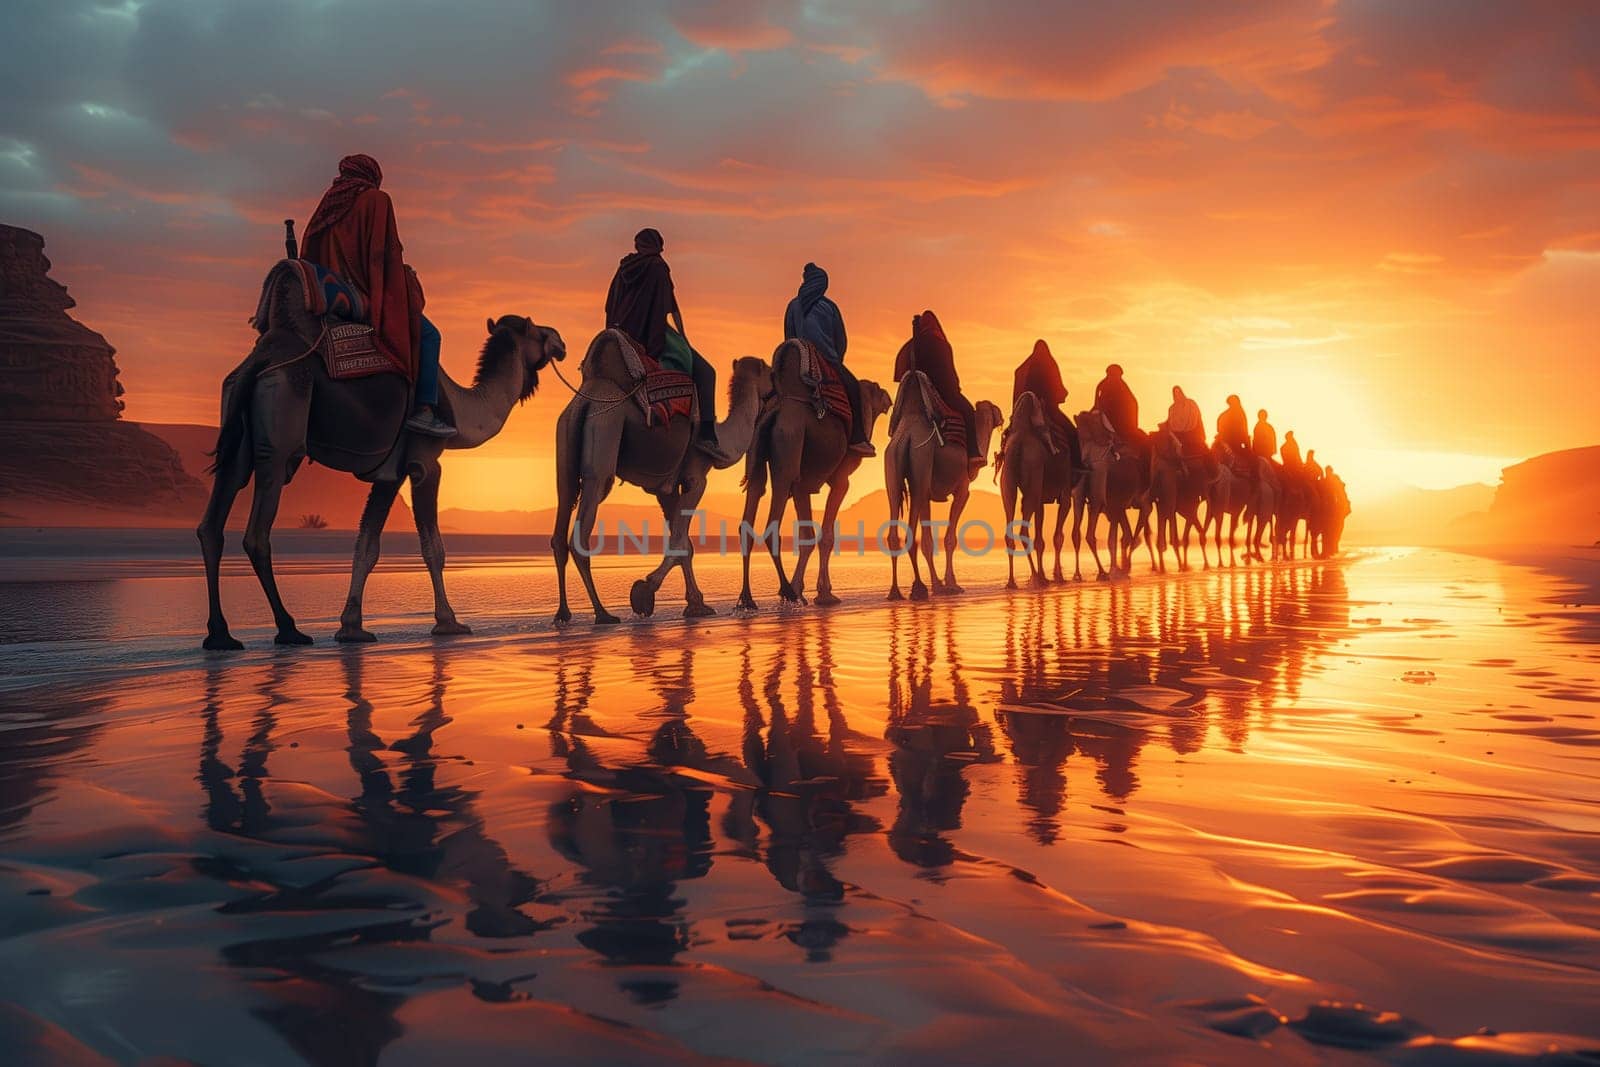 Group riding camels on beach at dusk under afterglow sky by richwolf